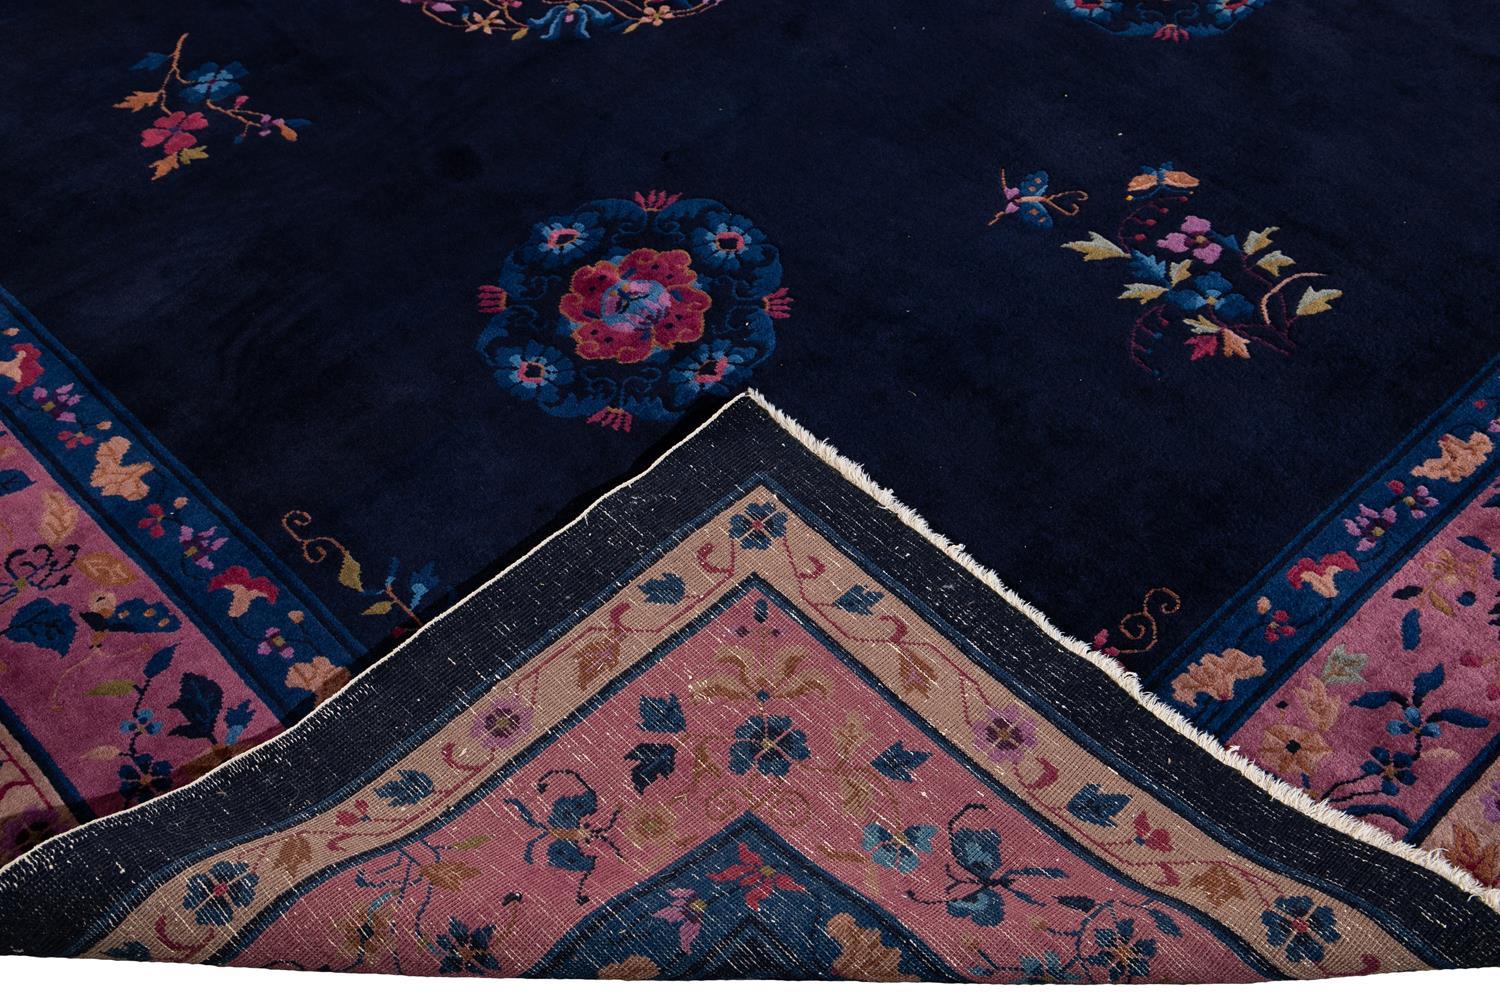 Beautiful antique Chinese Art Deco rug, hand knotted wool with a dark blue field, purple frame in an all-over Classic Chinese floral design, circa 1920.

This rug measures: 9' x 11'10